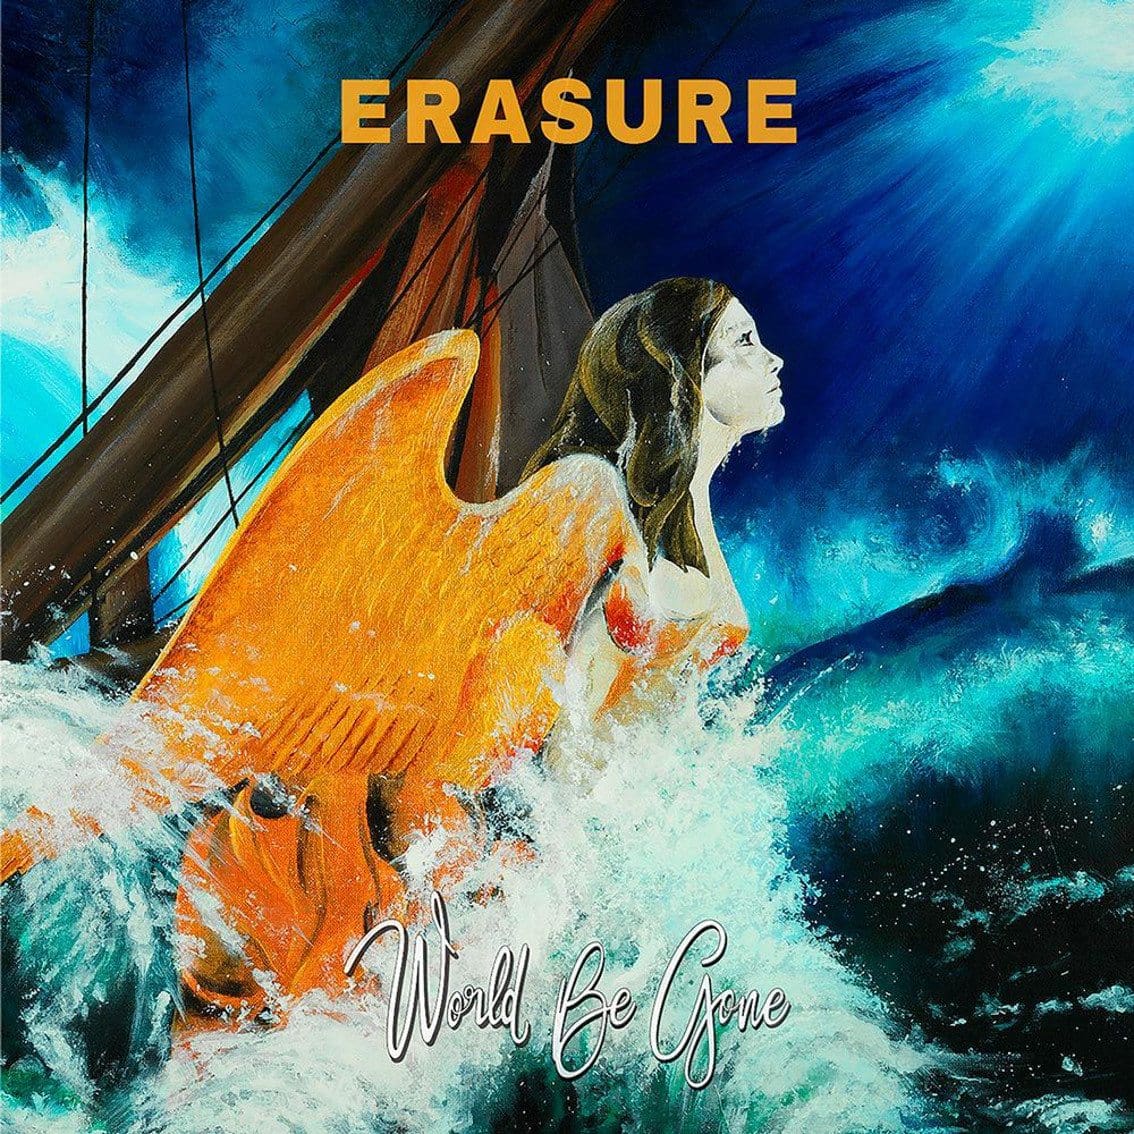 Erasure to release 17th studio album 'World Be Gone' in May on cassette, vinyl and CD